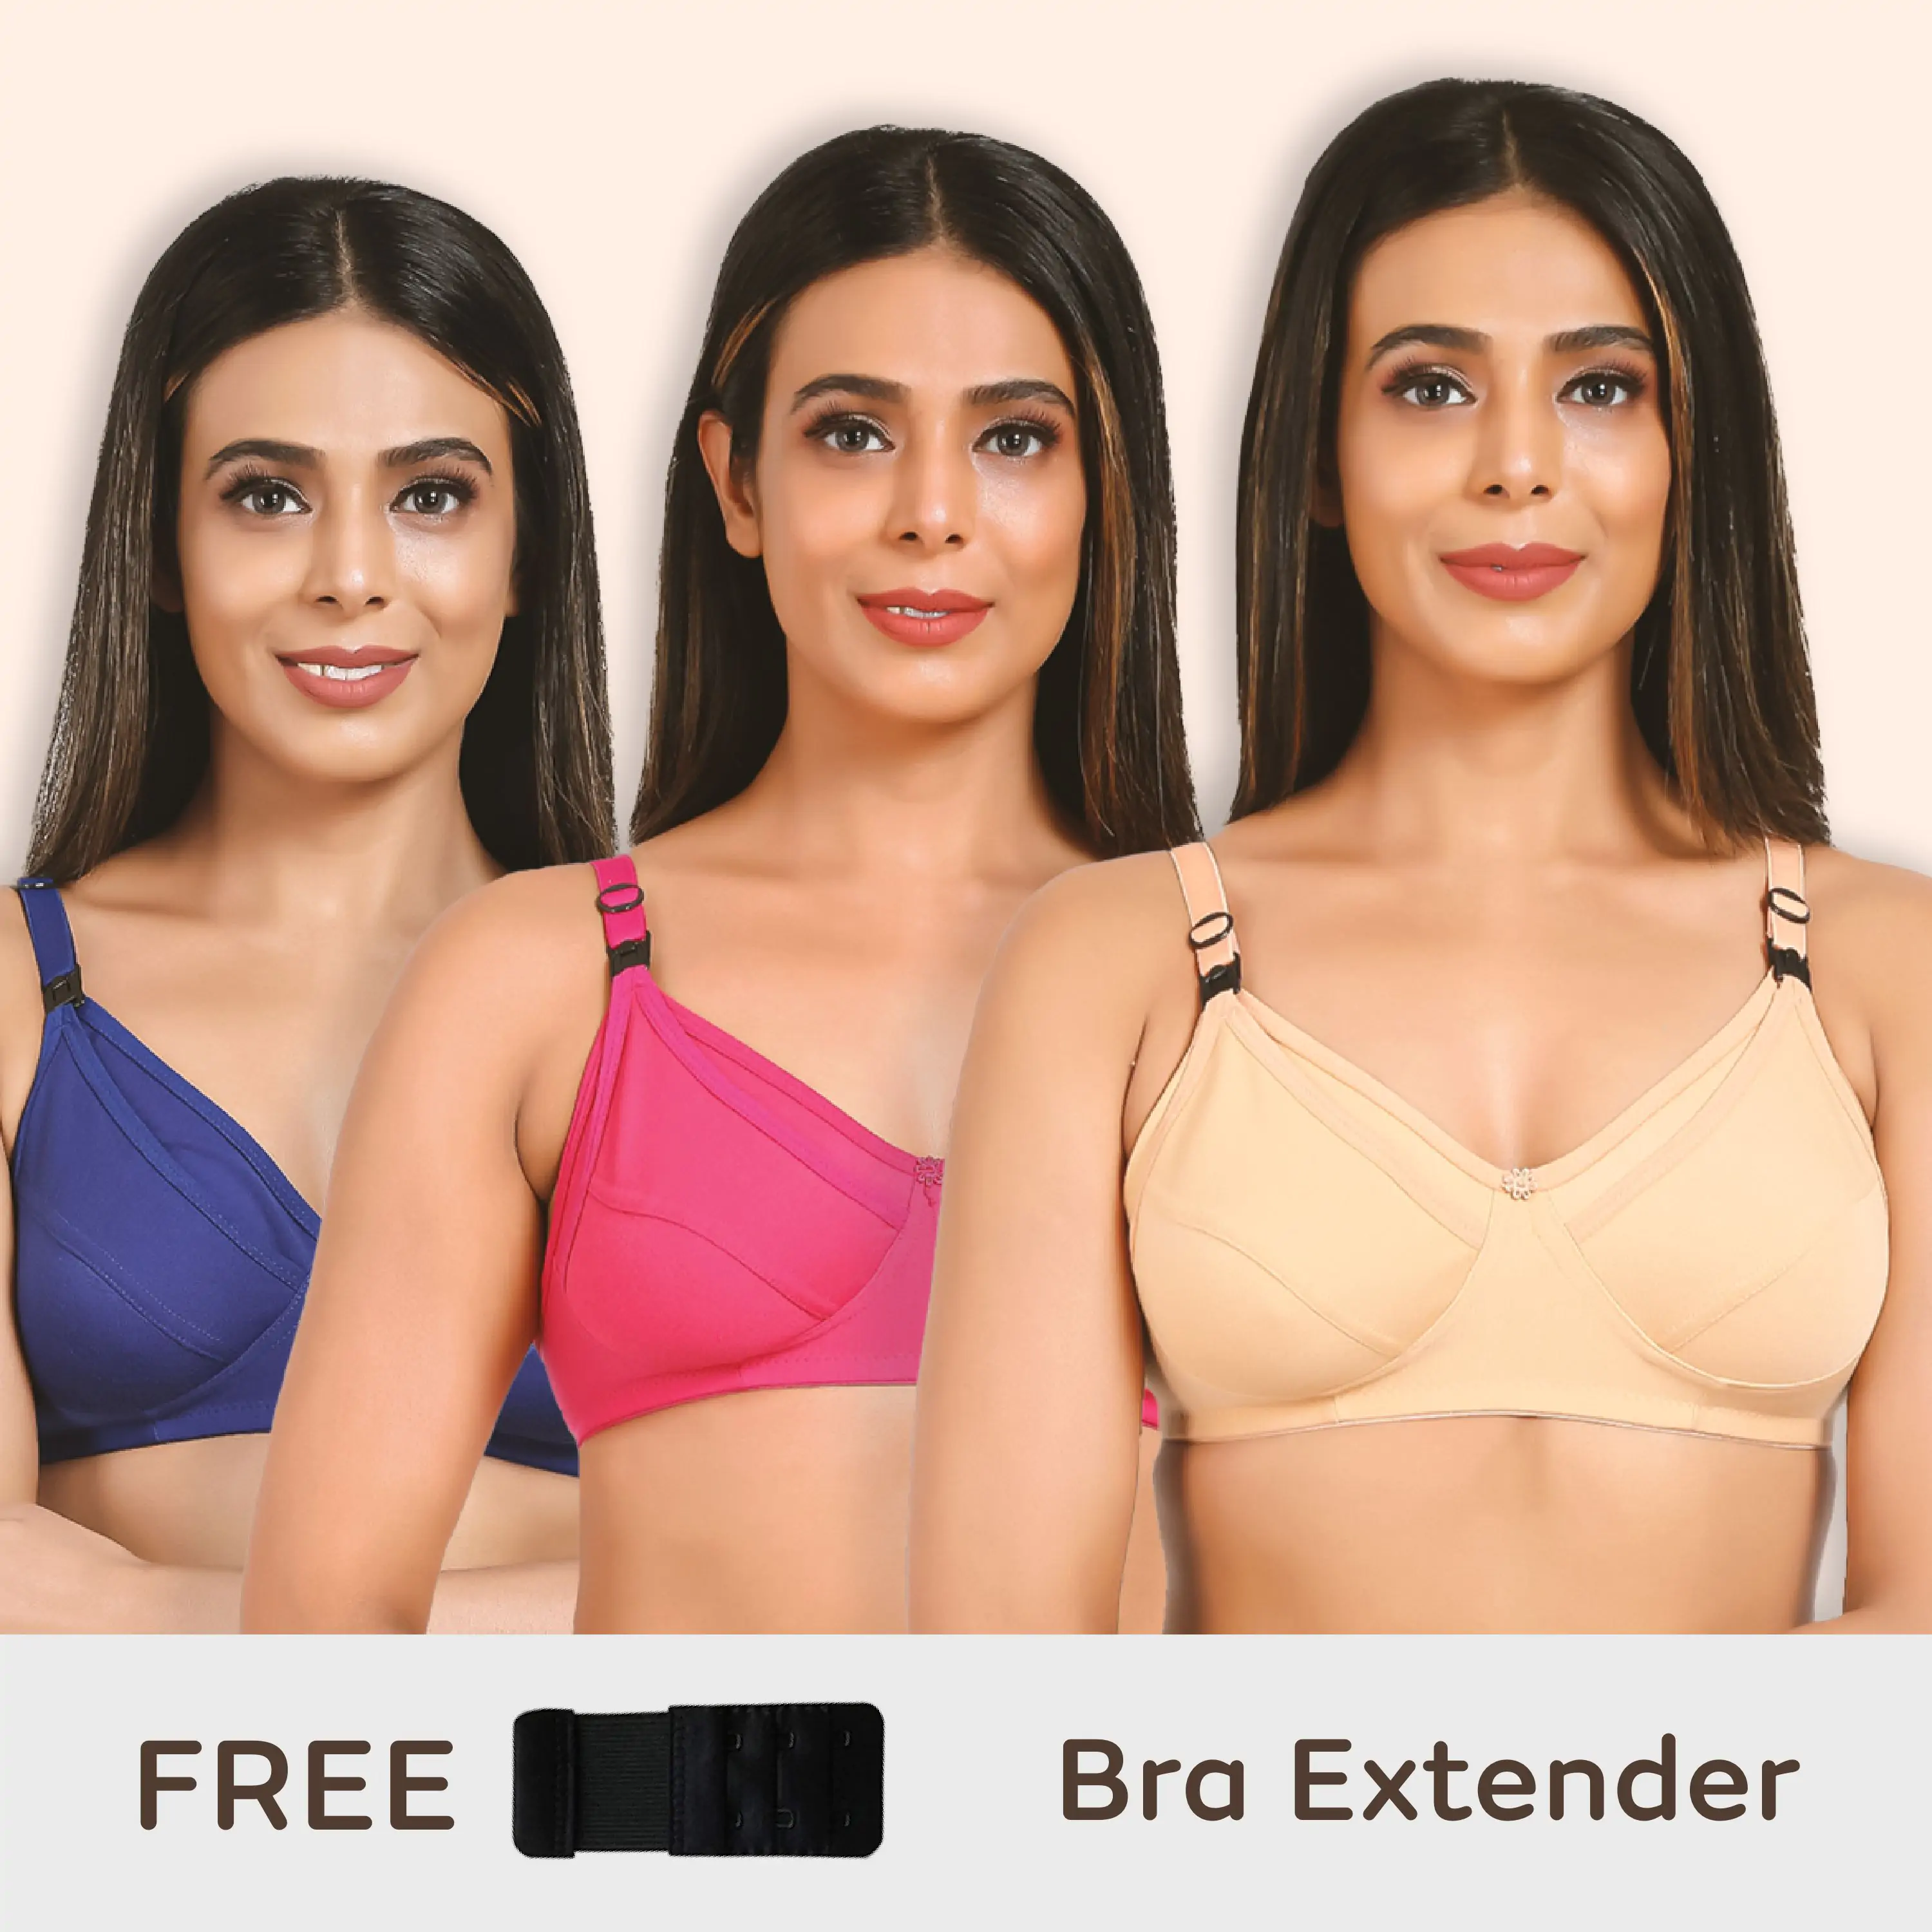 Maternity/Nursing Bras Non-Wired, Non-Padded - Pack of 3 with free Bra Extender (Sandalwood, Persian Blue & Dark pink) 32 B